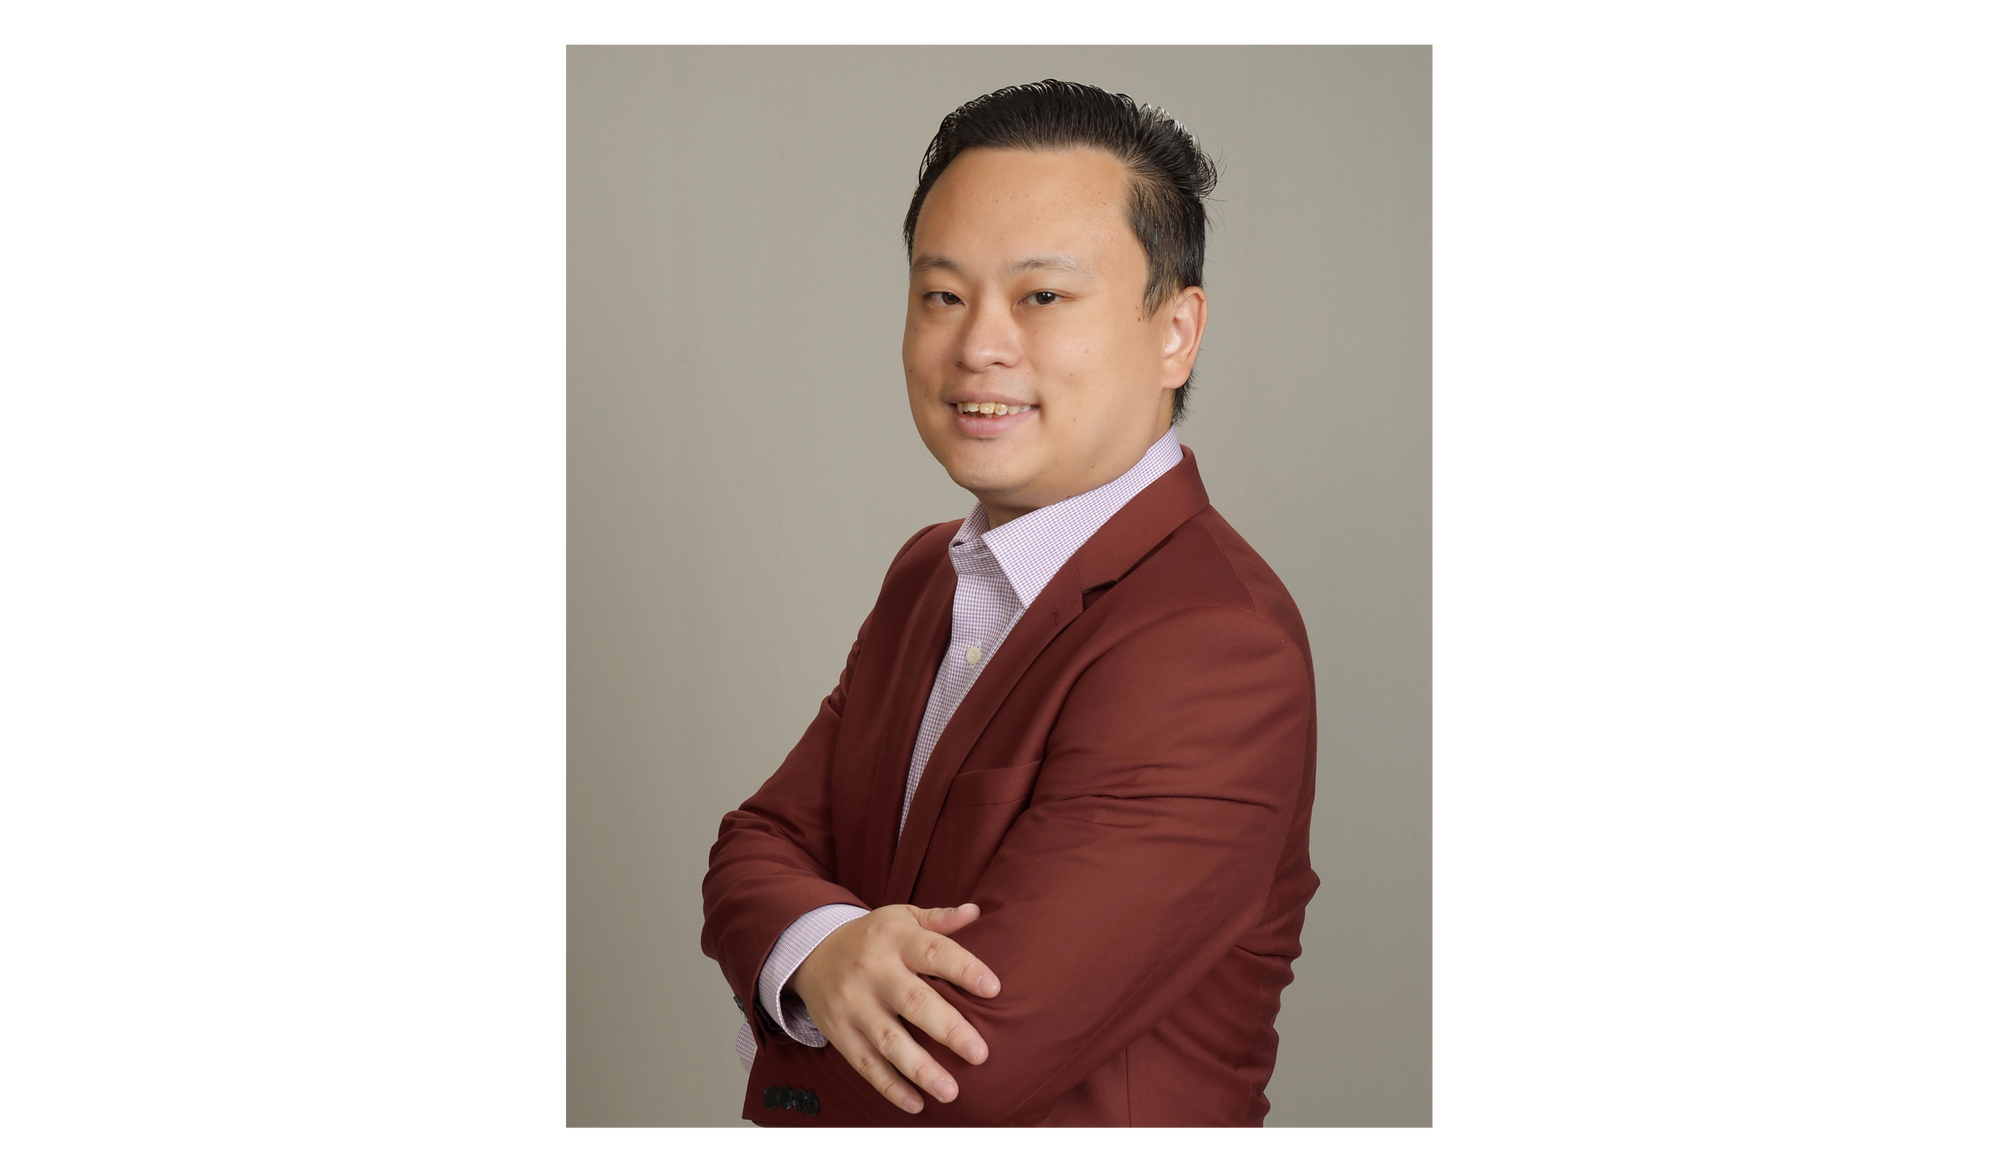 Live a Bold and Confident Life - William Hung